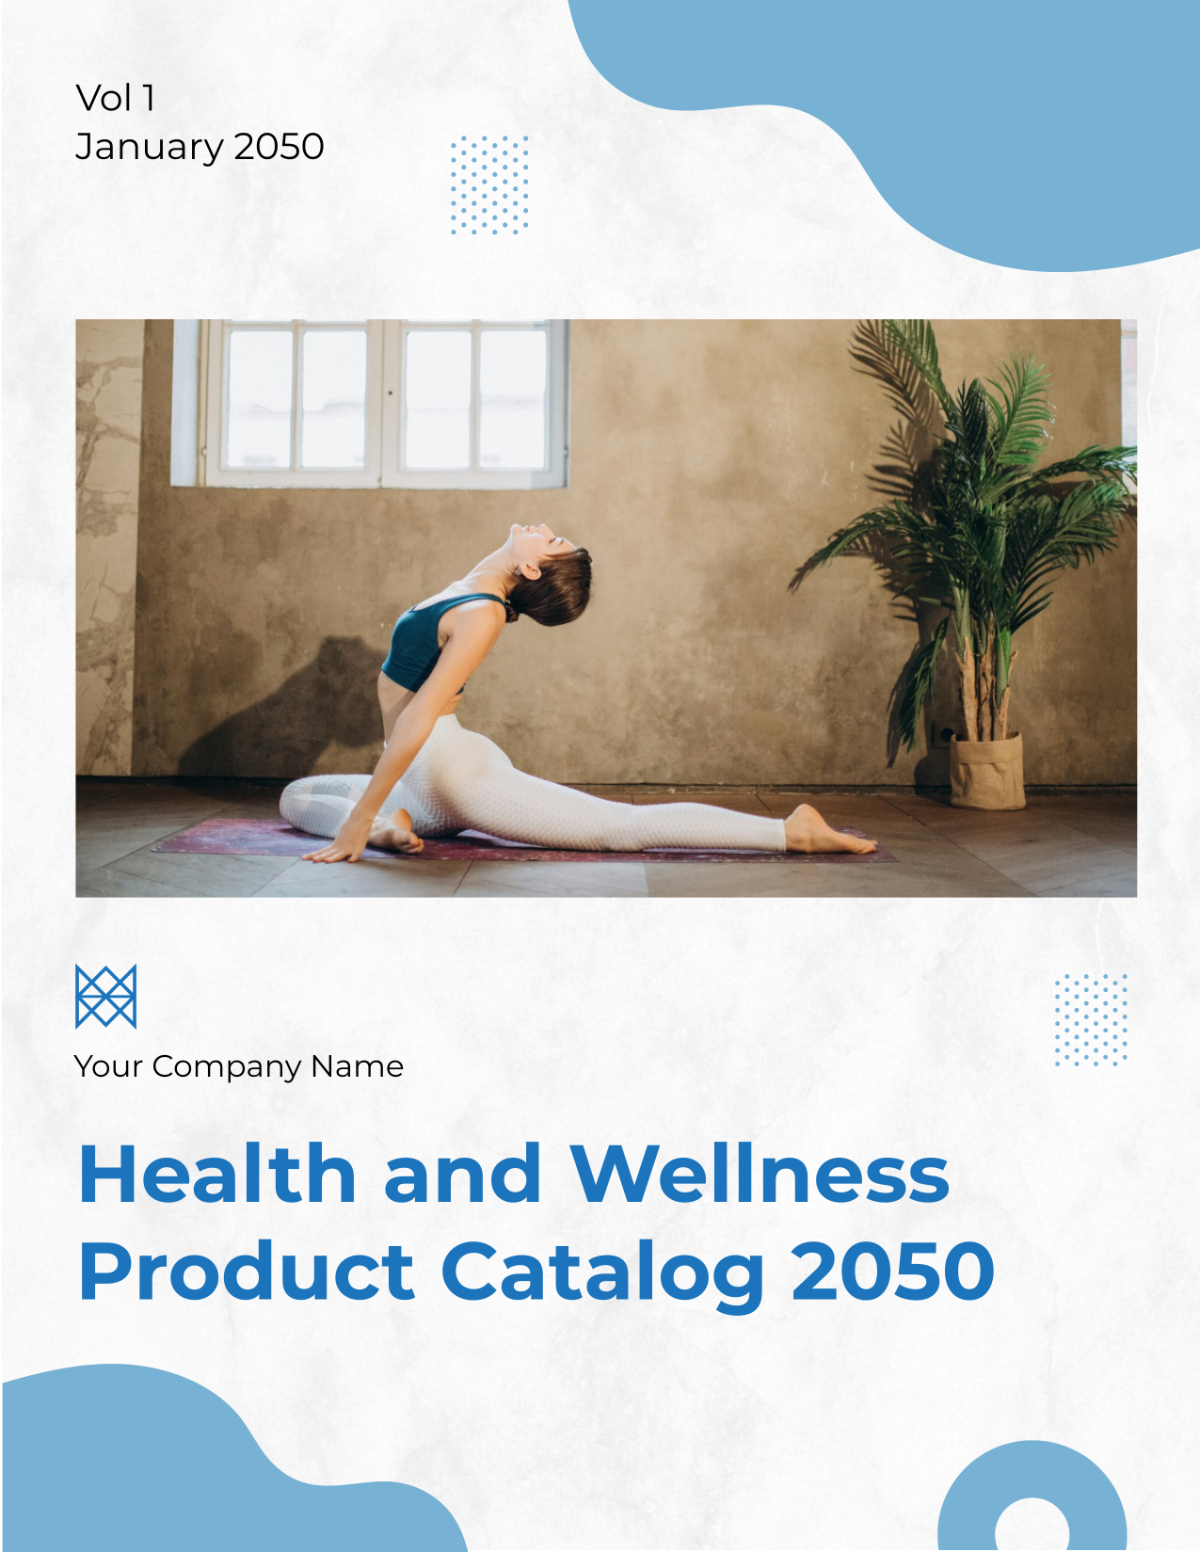 Health and Wellness Products Catalog